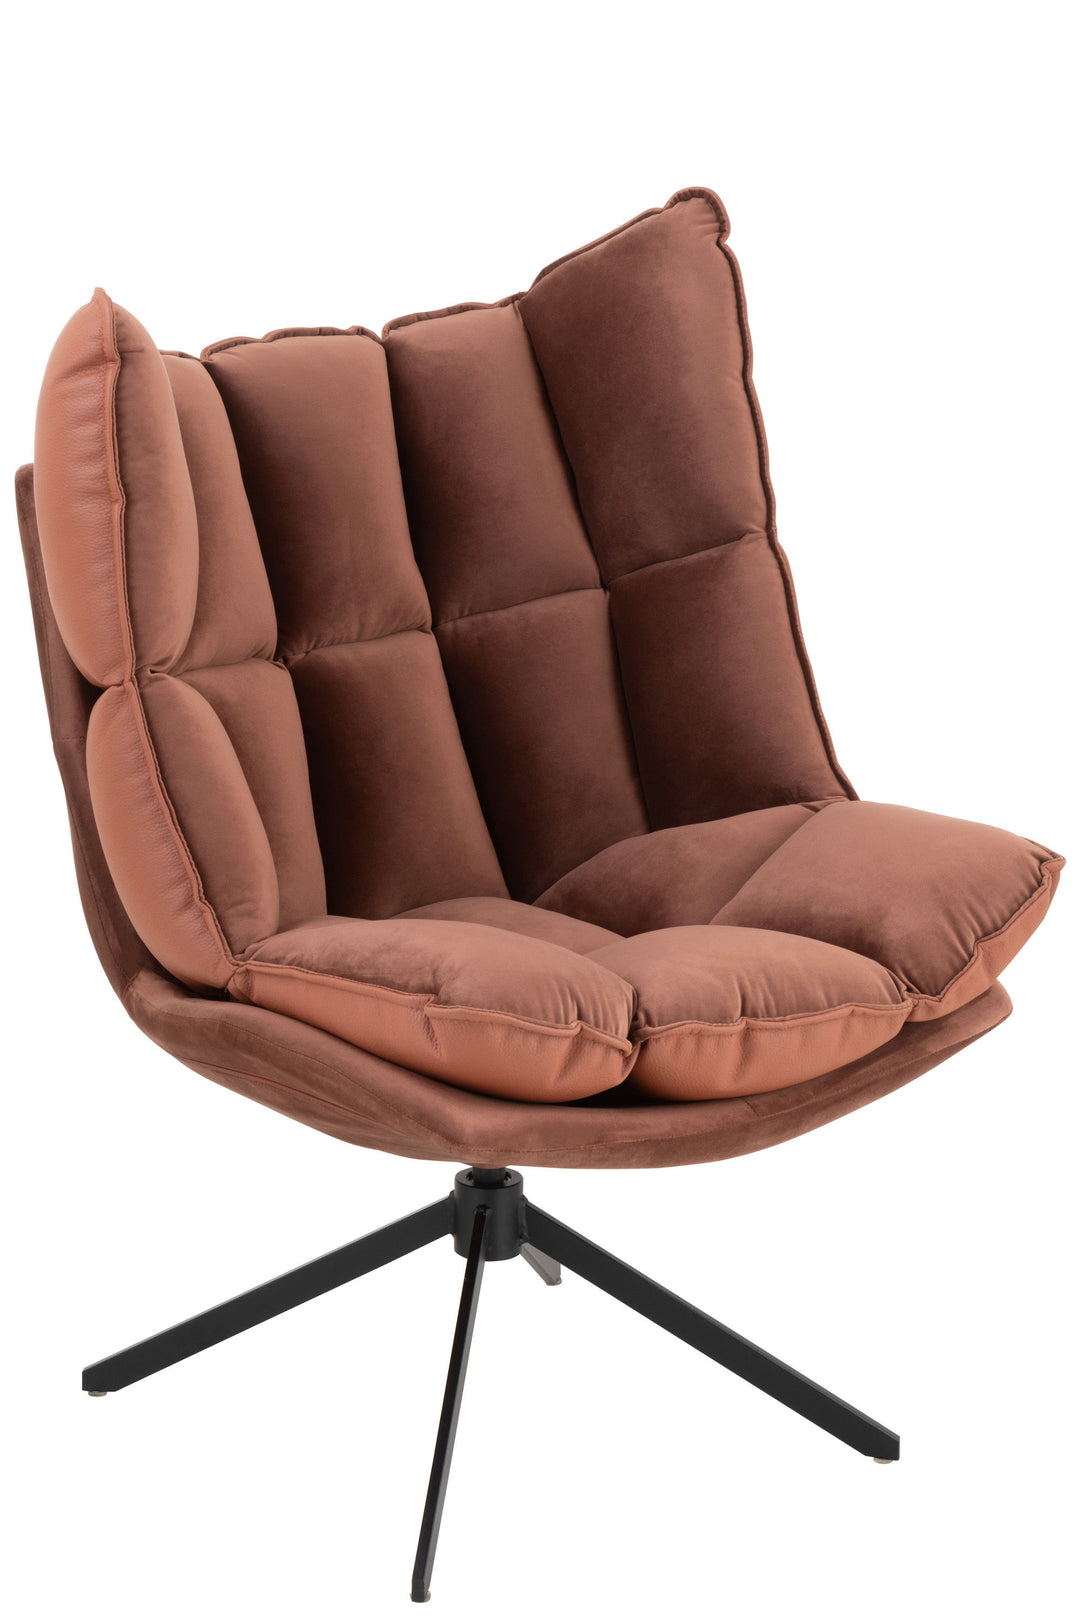 J-Line by Jolipa CHAIR RELAX CUSHION ON FRAME TEXTILE/METAL RUST BROWN